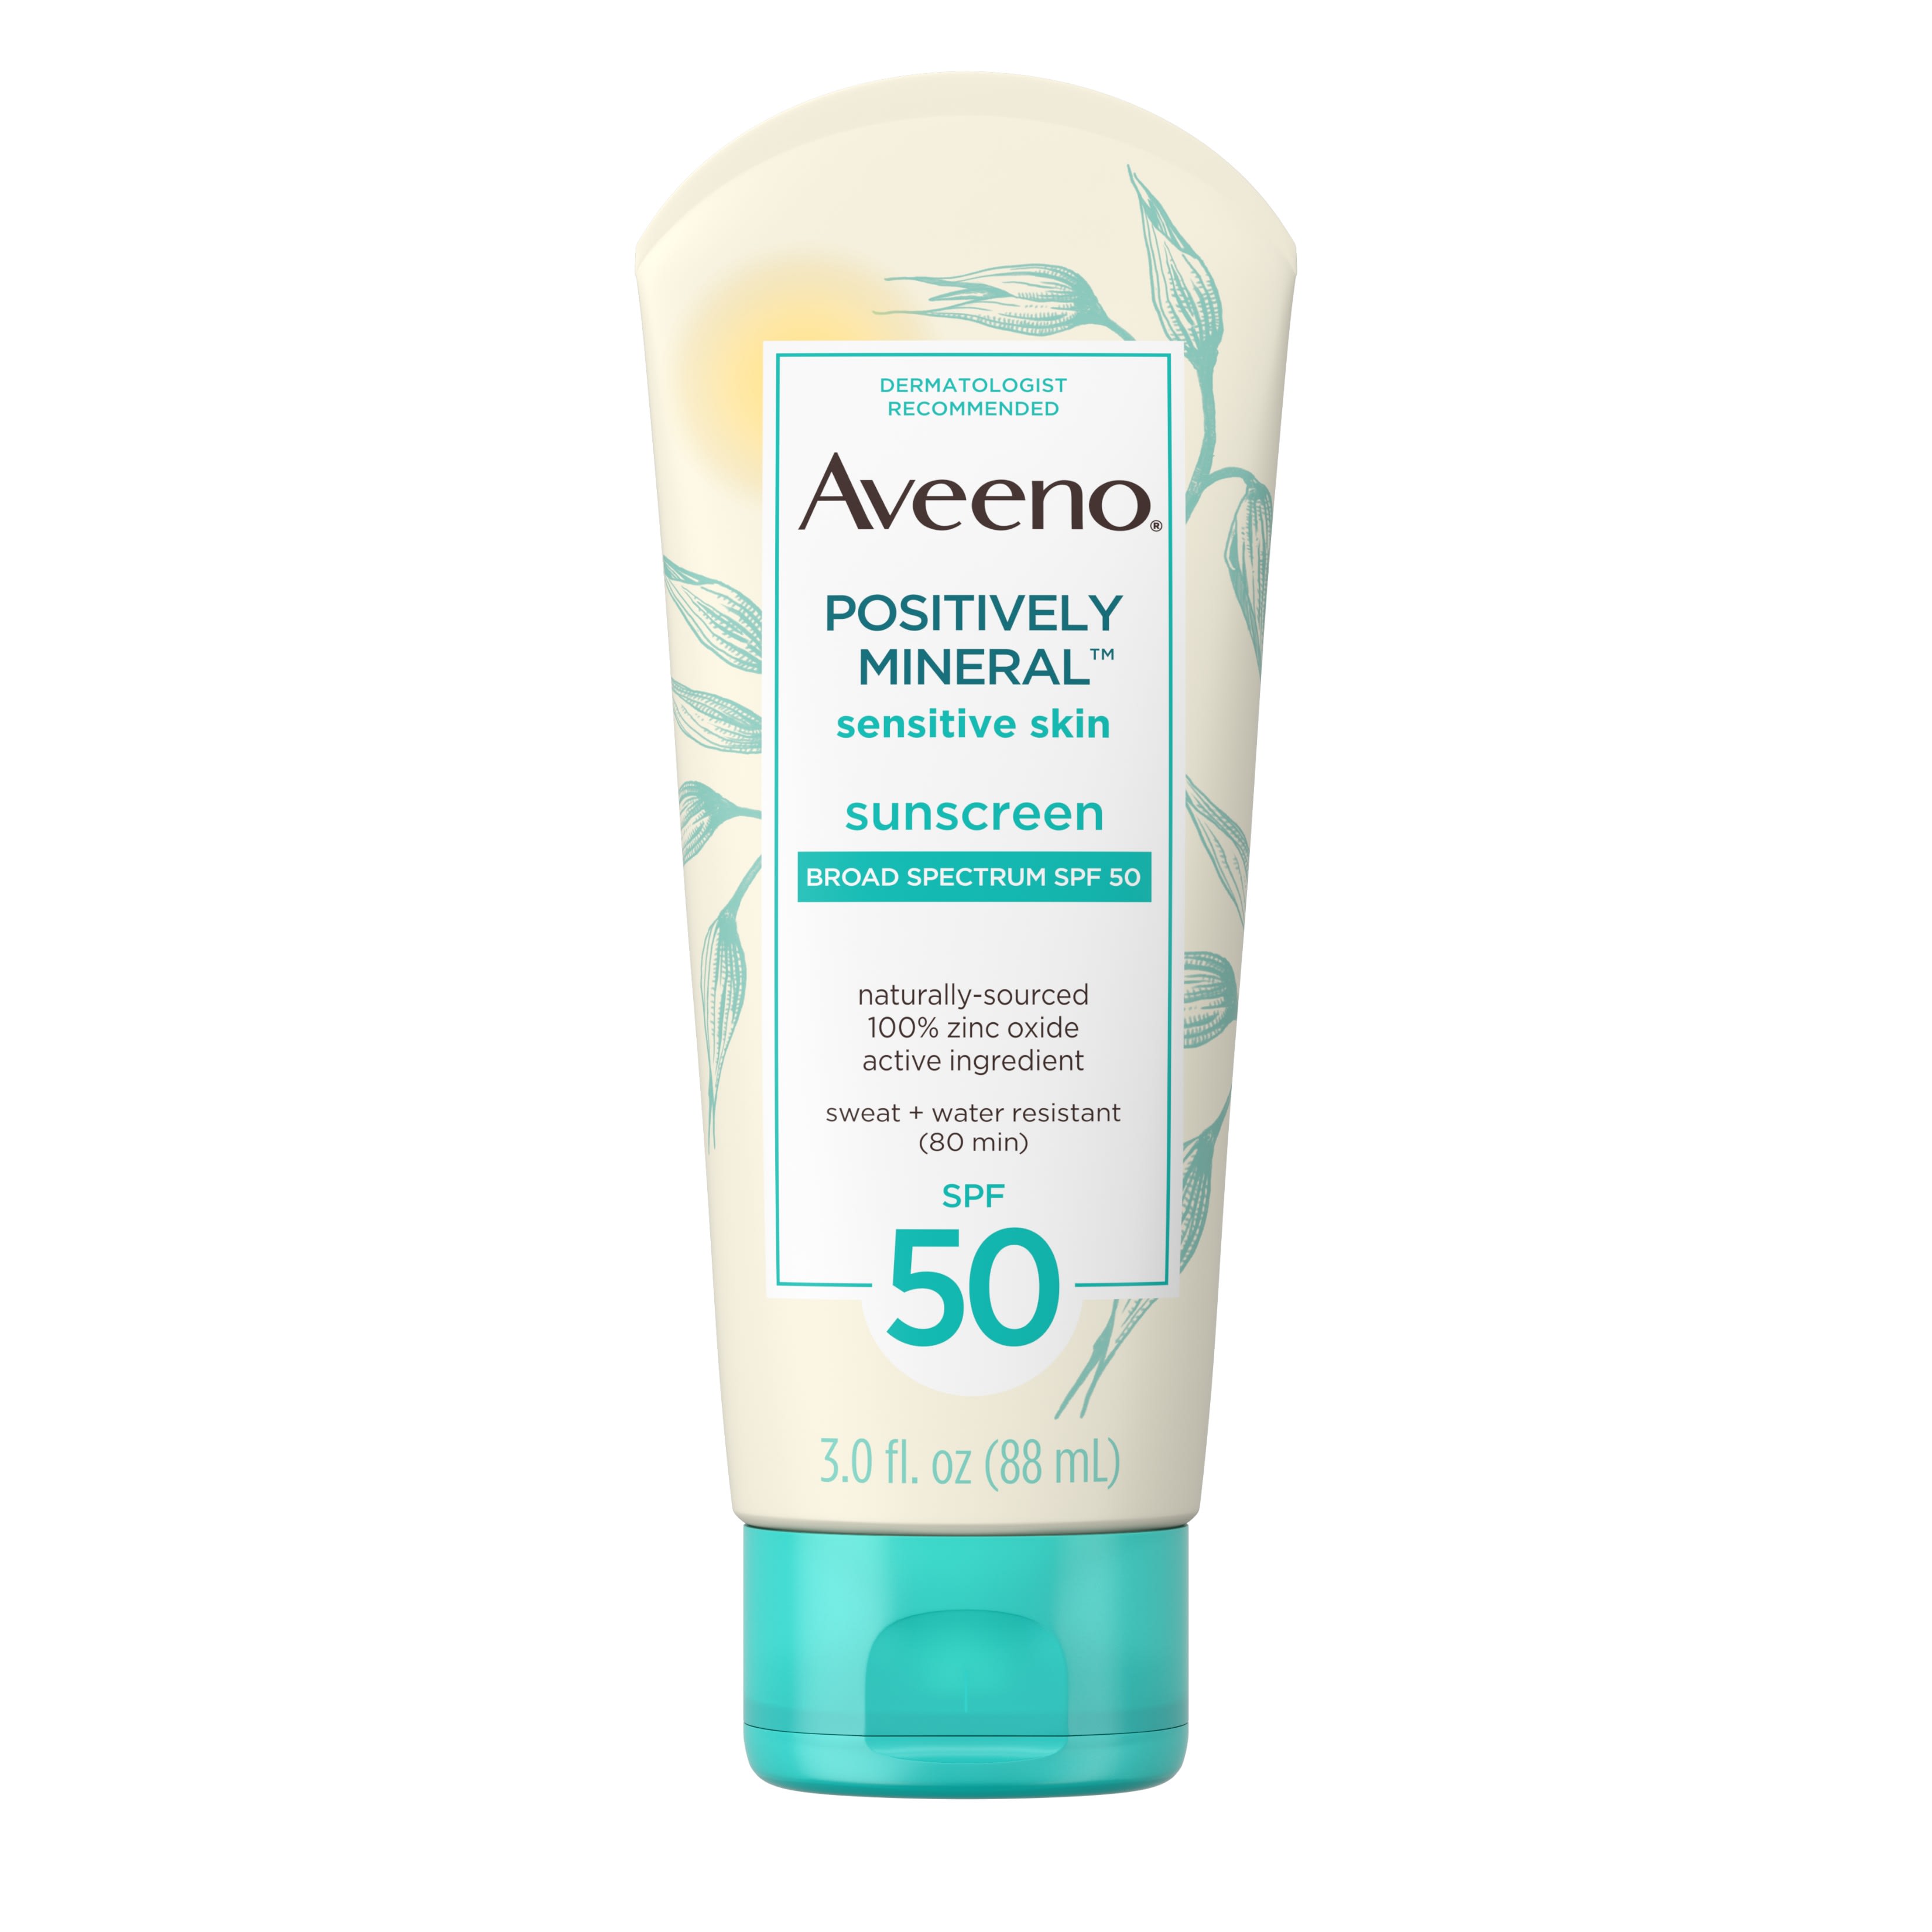 Aveeno Positively Mineral Sensitive Sunscreen Lotion SPF 50, 3 fl. oz - image 1 of 16